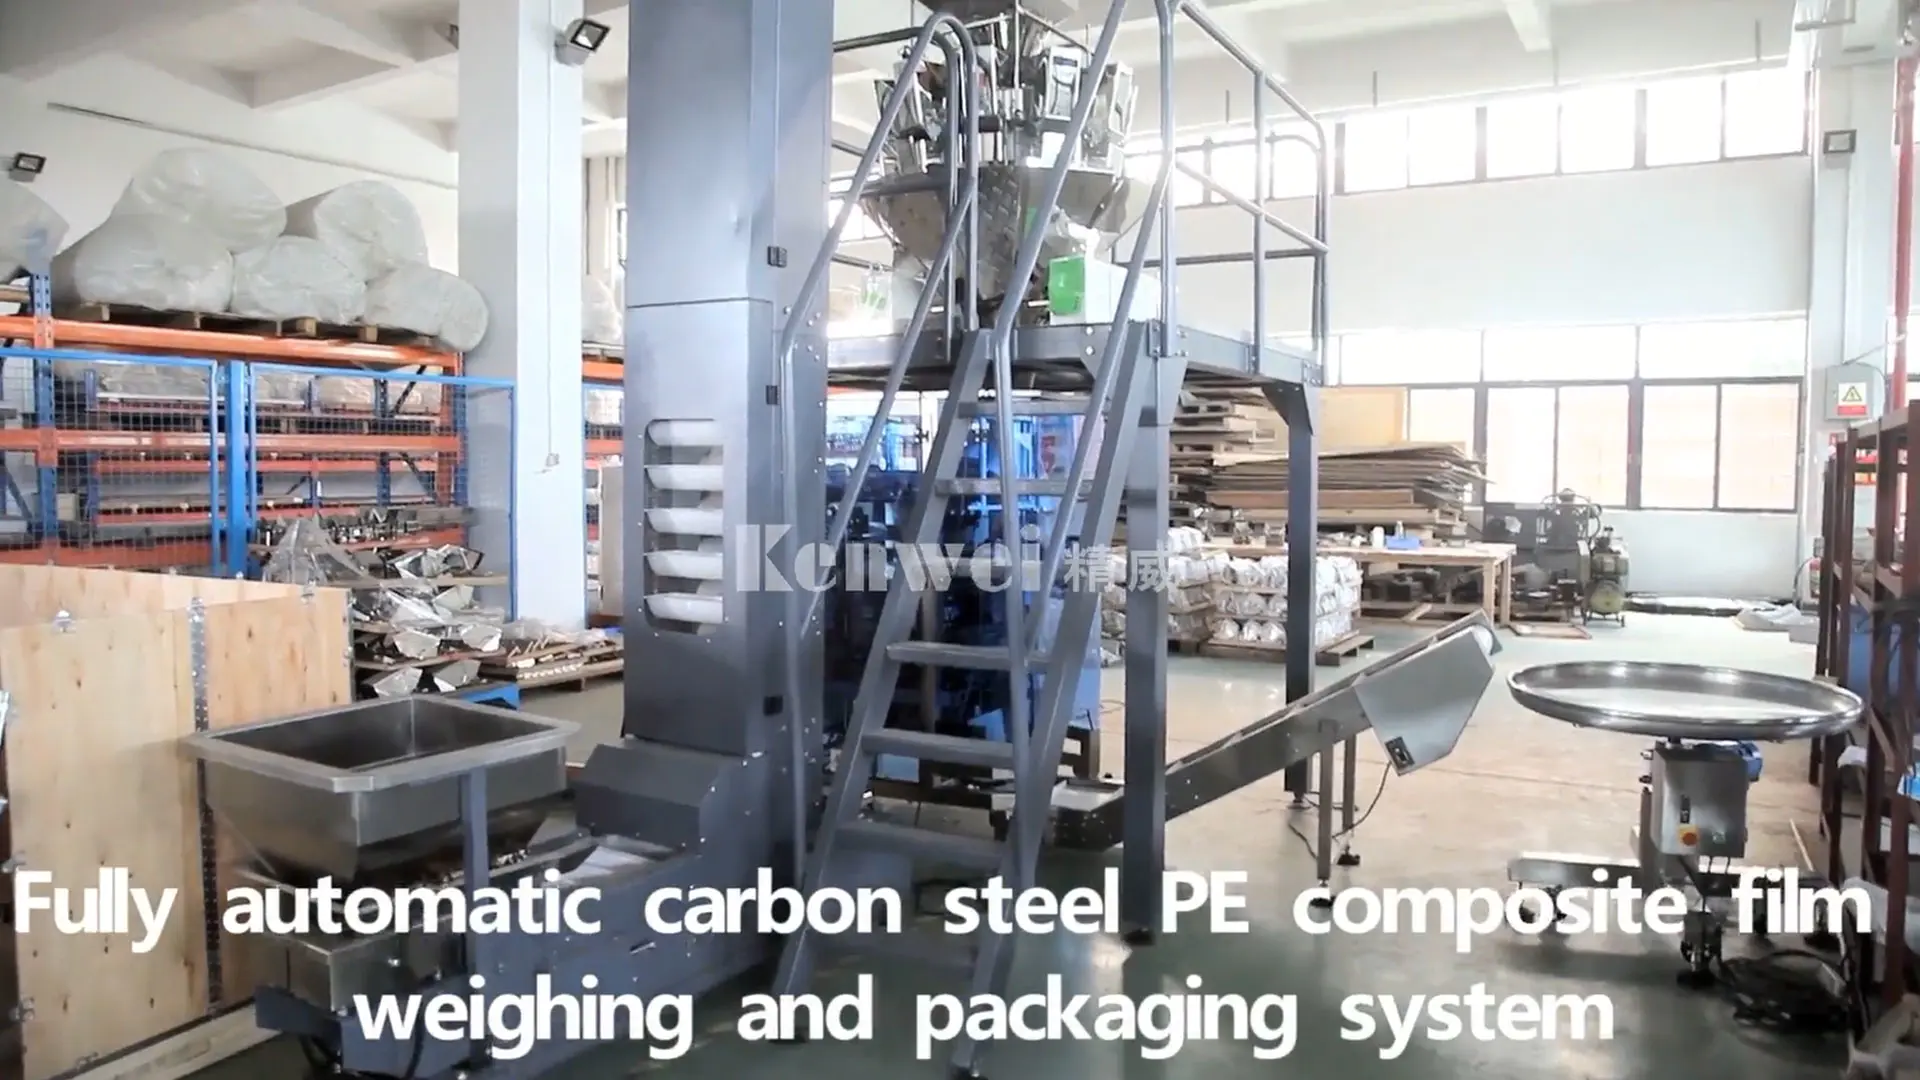 Automatic Carbon Steel PE Film Composite Film Weighing and Packaging System